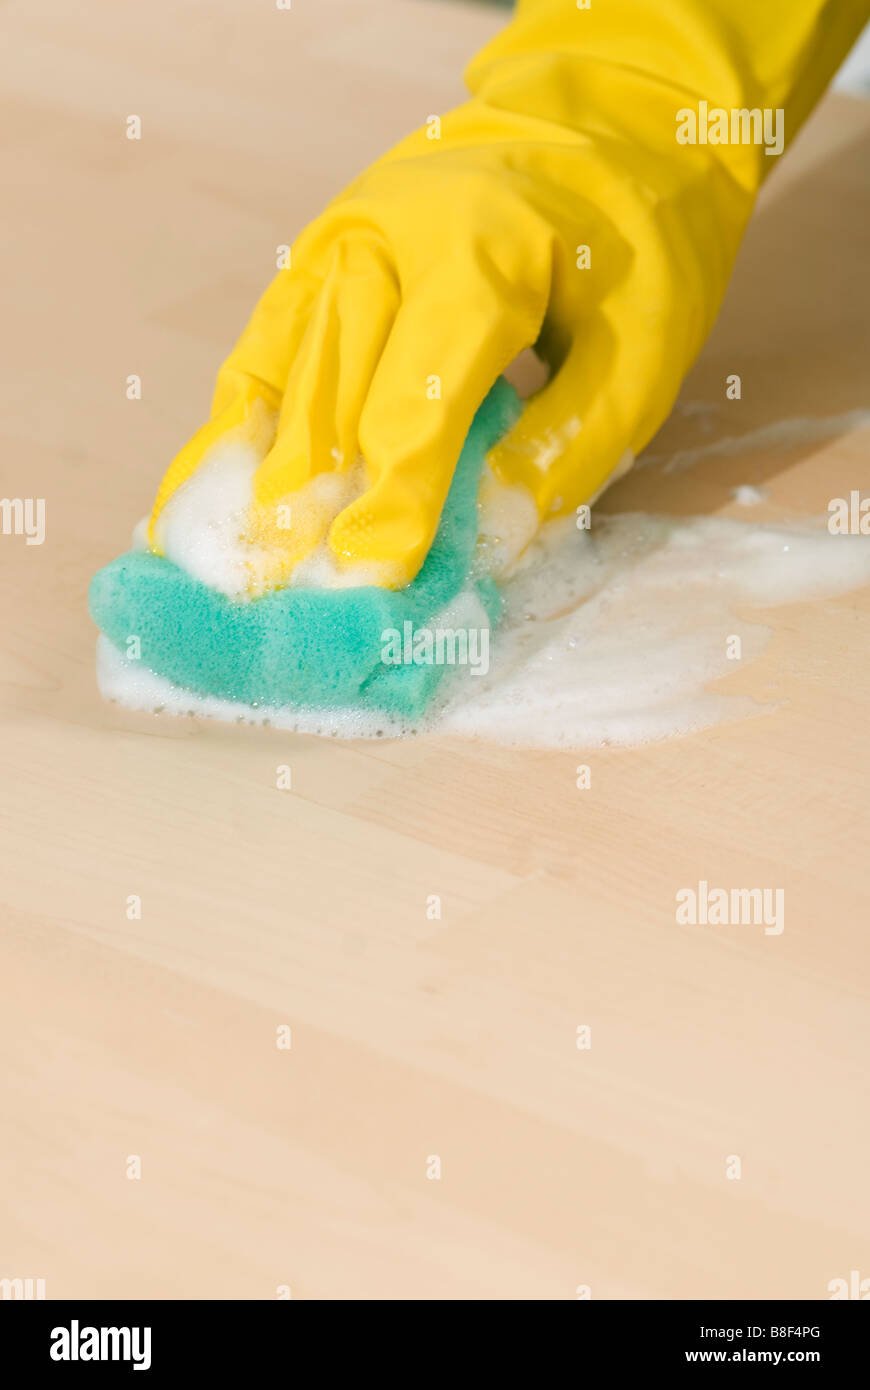 Close up of woman's hand in yellow rubber gloves scrubbing a surface with a sponge Stock Photo